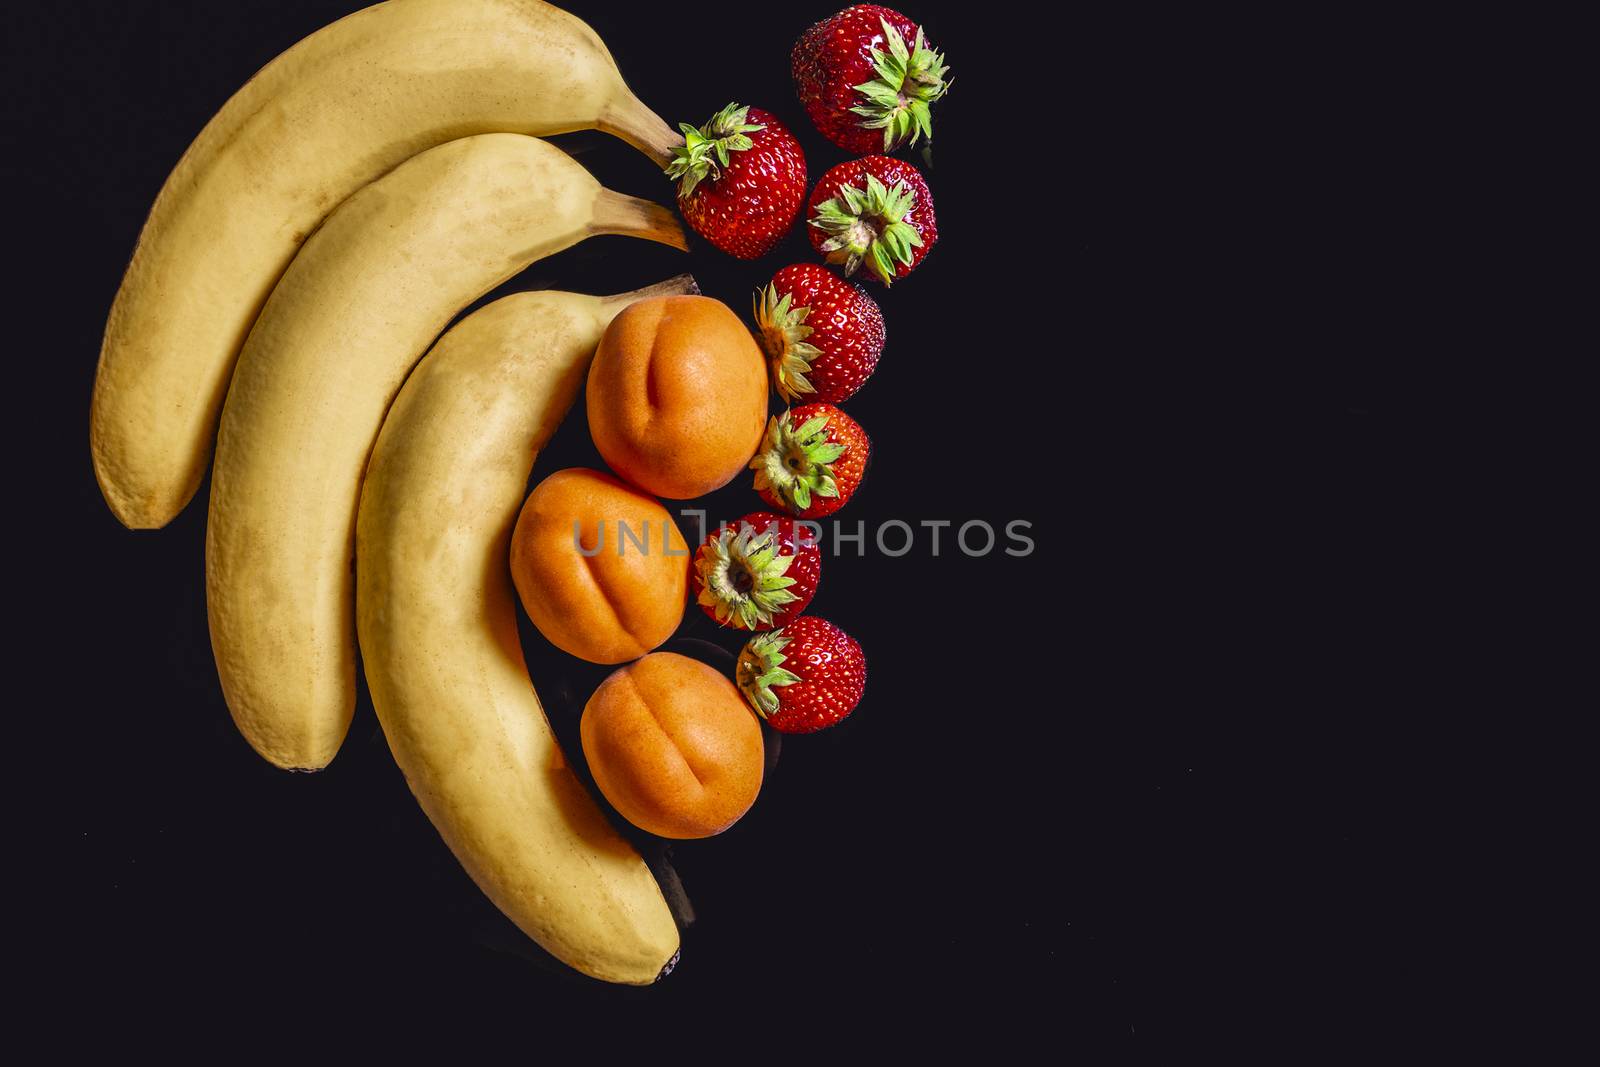 Bananas, apricots and strawberries against a black background  by ben44